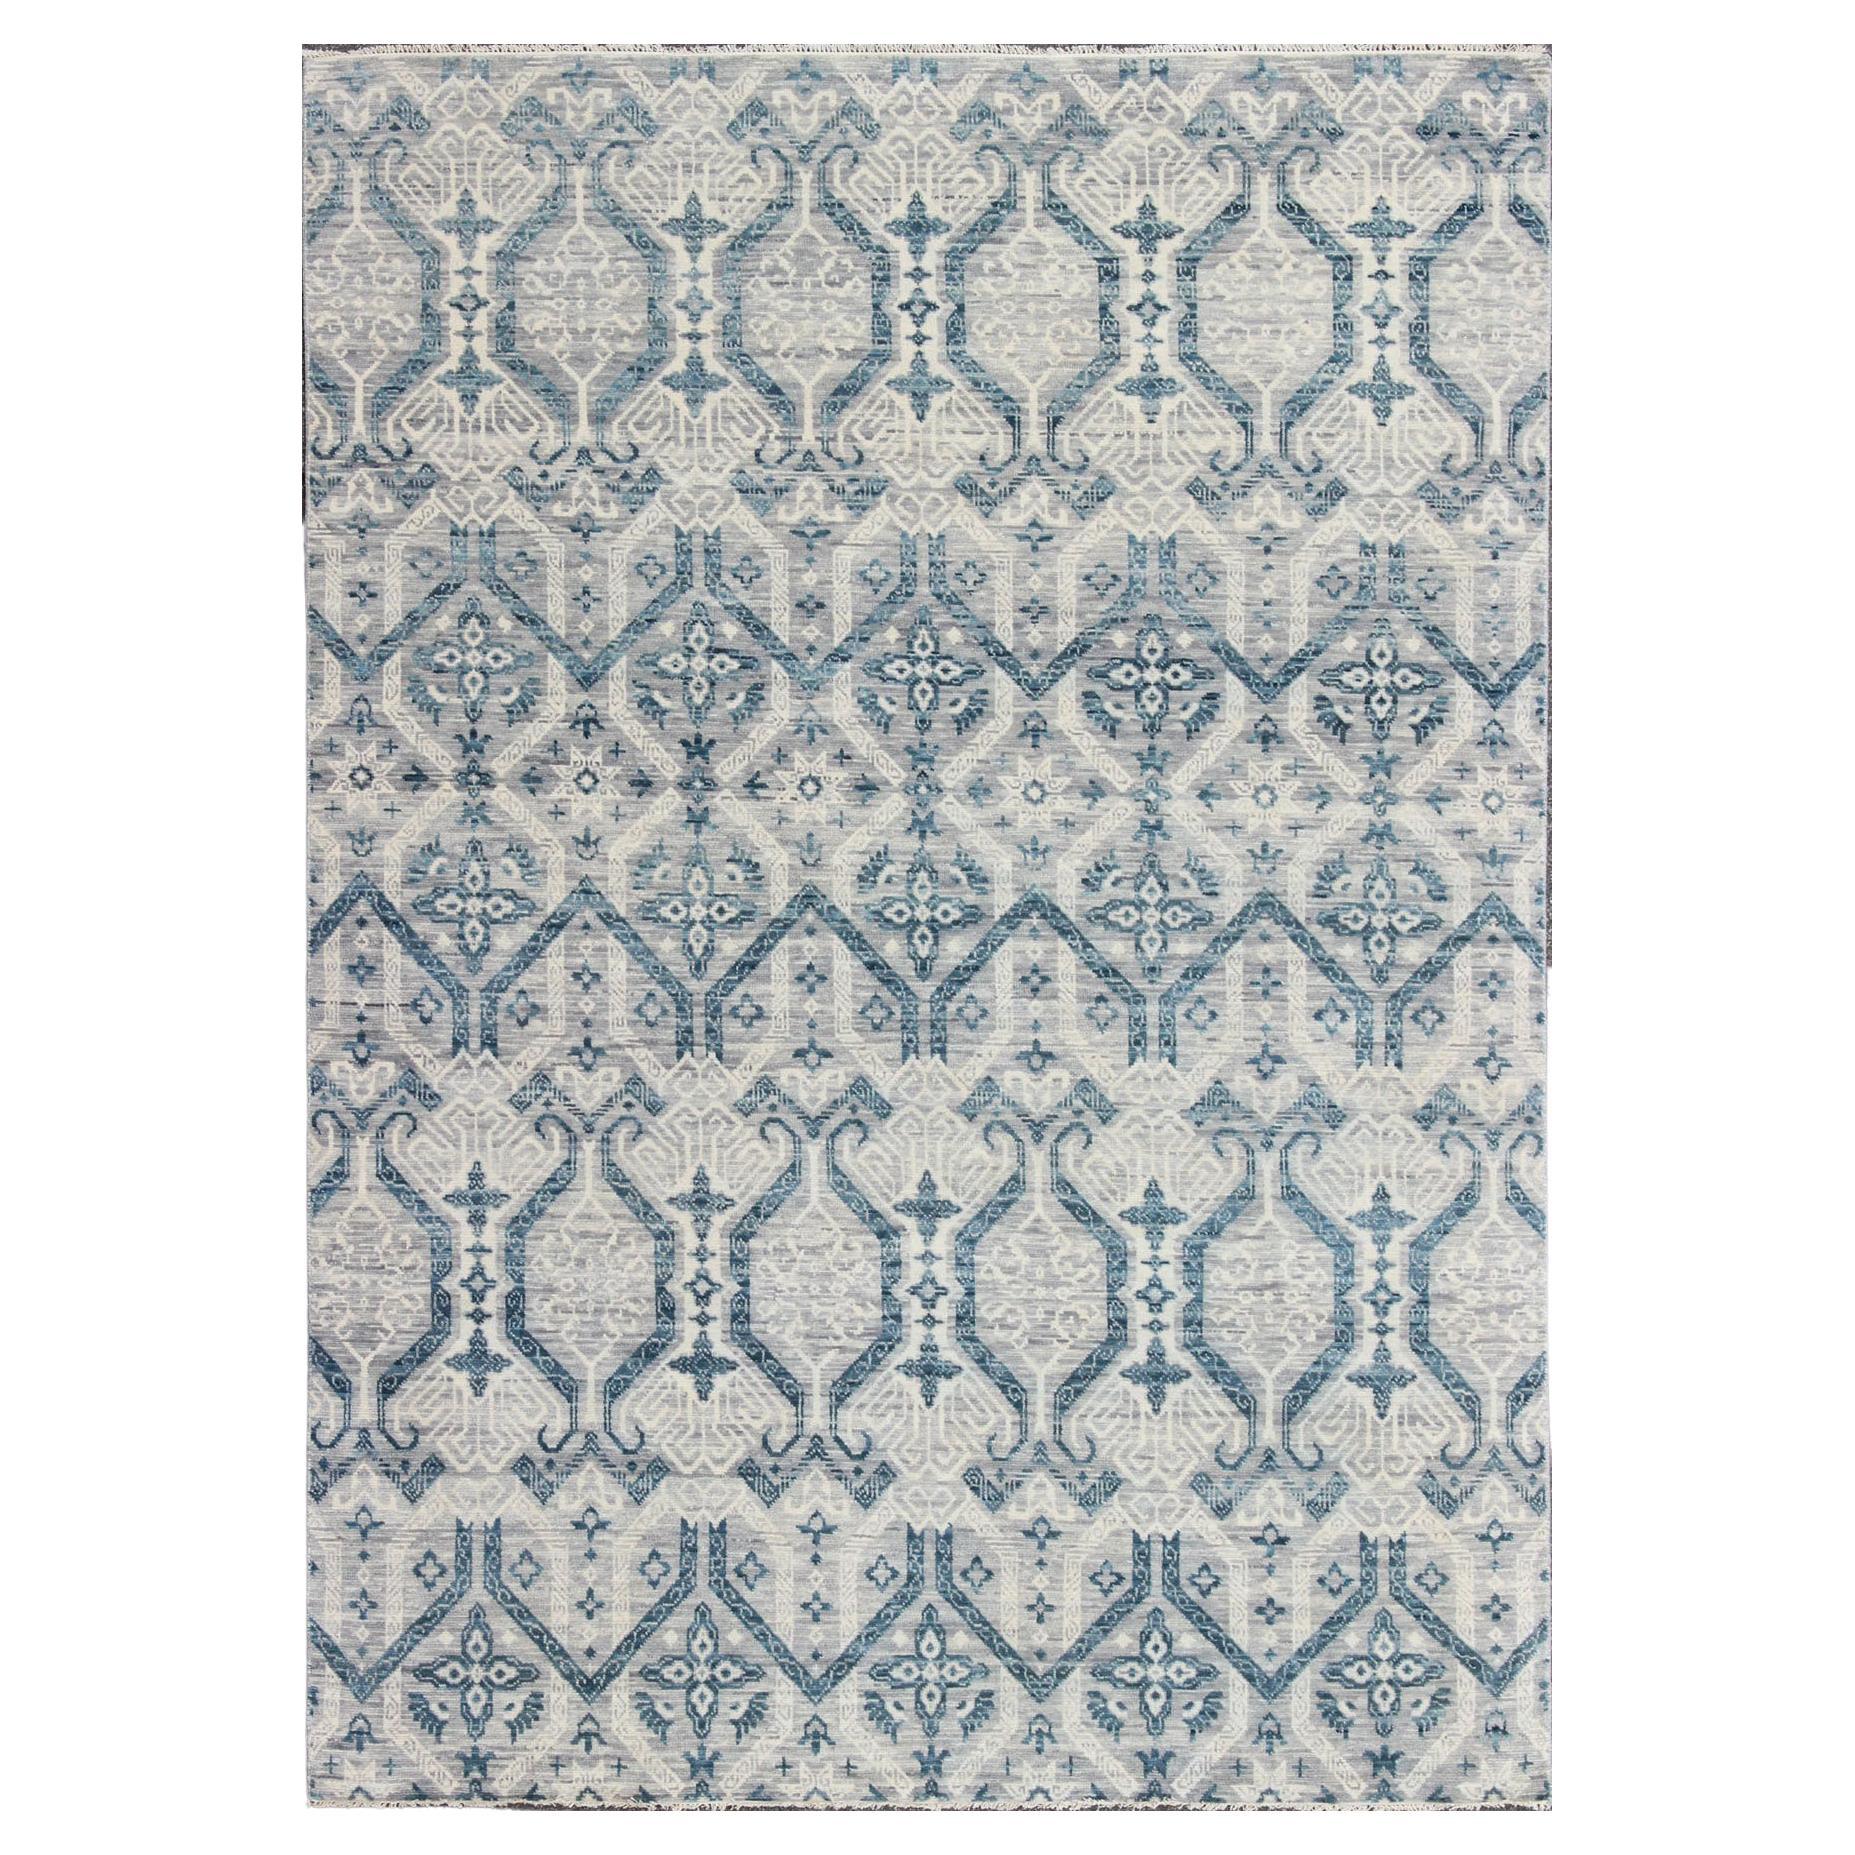 Geometric All-Over Transitional Rug in Shades of Blue, Gray & Ivory For Sale